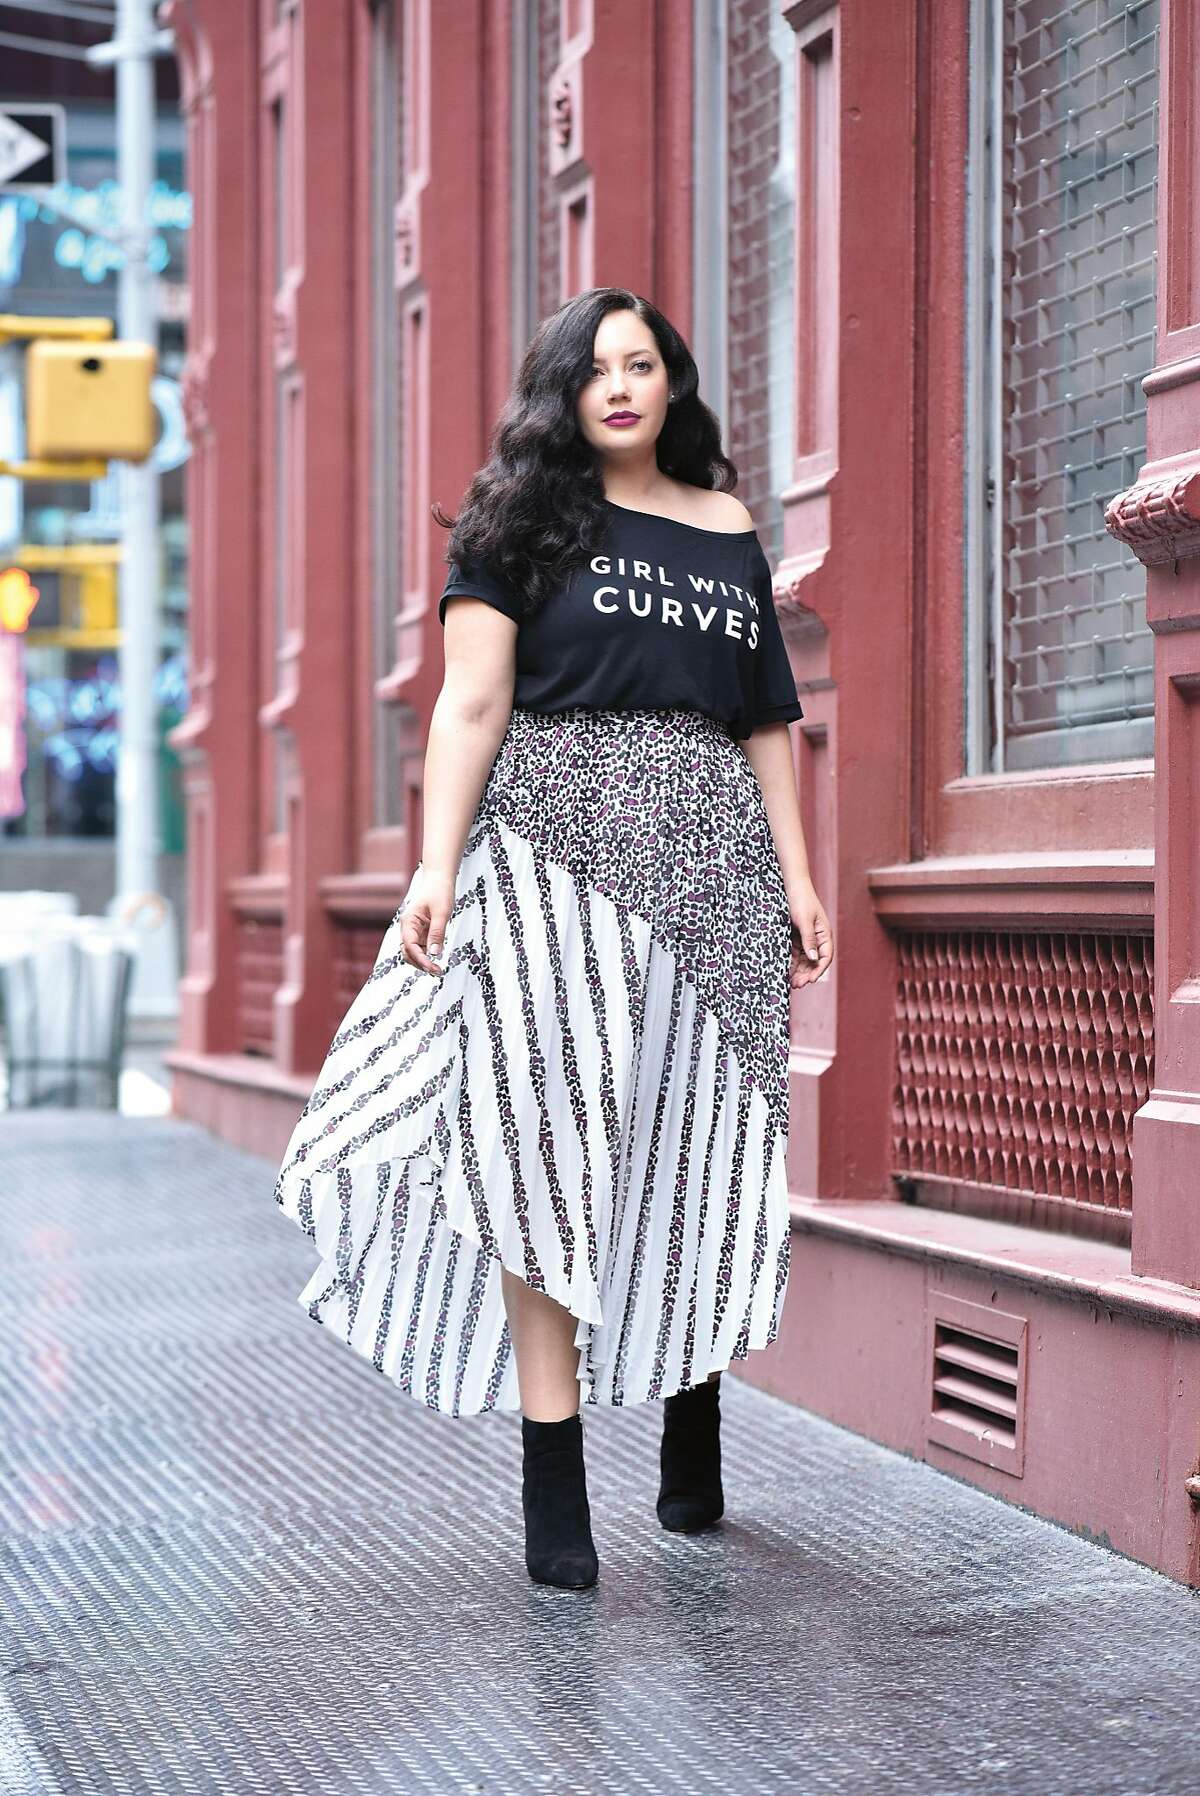 This September, Tanesha Awasthi will become the first influencer to collaborate with preeminent plus-size clothing store chain Lane Bryant. The 20-piece Girl With Curves x Lane Bryant collection features fashion-forward meets practical designs, such as a navy pleated coat that doubles as a dress and a midi-length sweater cape that looks as if it strutted straight off the runway. It will be available September 9.